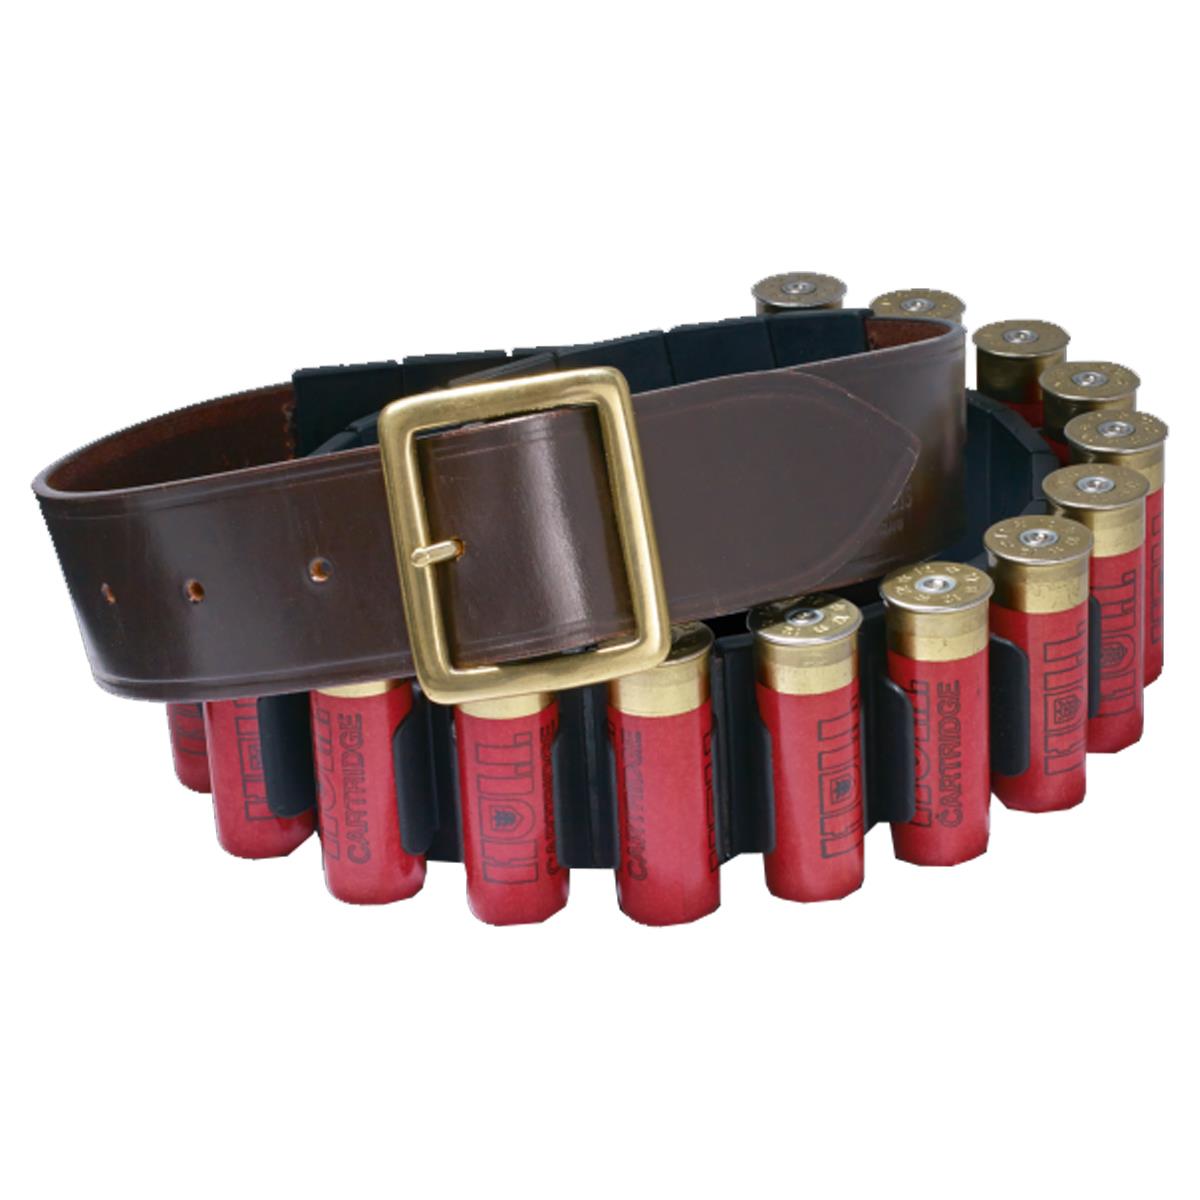 What’s the difference in 12G and 20G on the Croots Malton Bridle Leather Cartridge Belt?